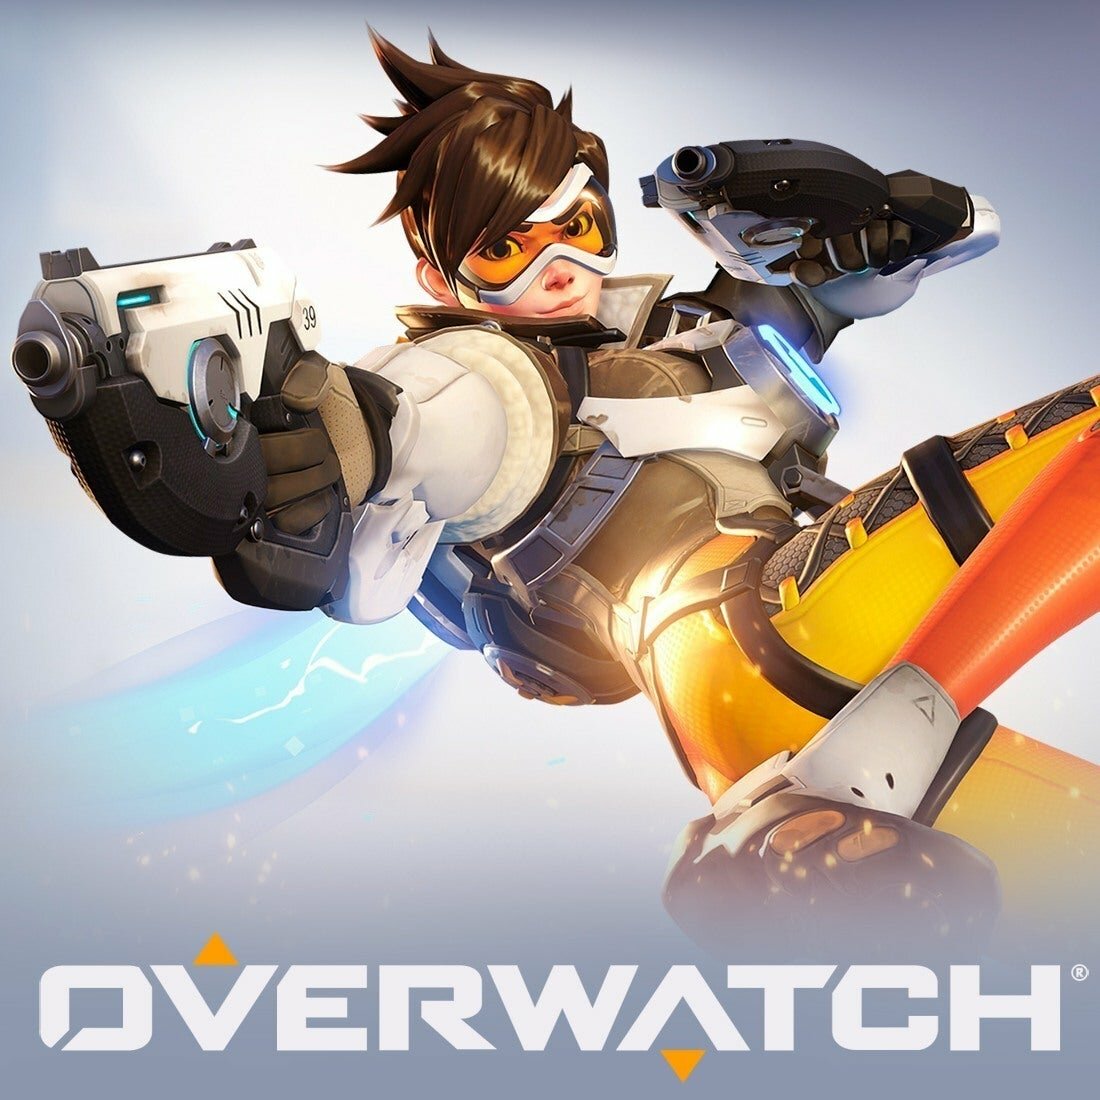 Overwatch logo featuring the character Tracer